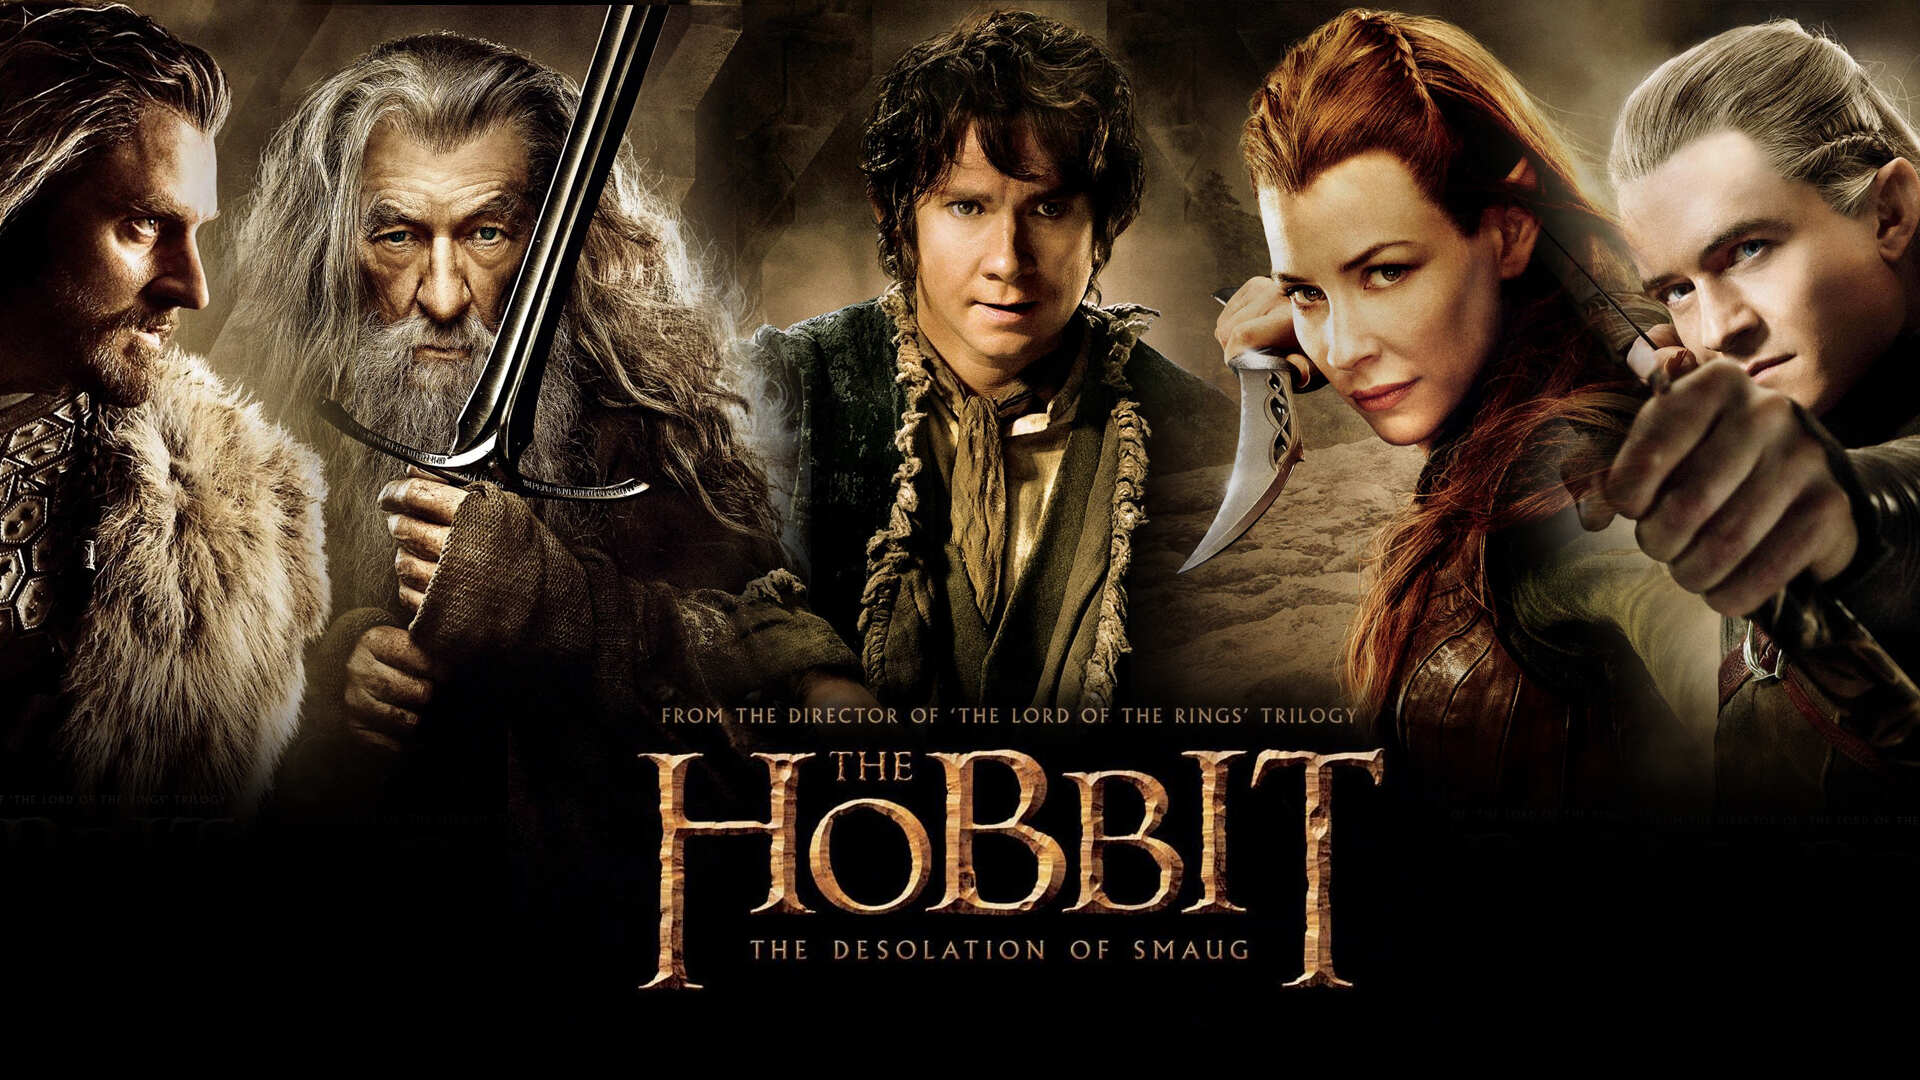 32-facts-about-the-movie-the-hobbit-the-desolation-of-smaug